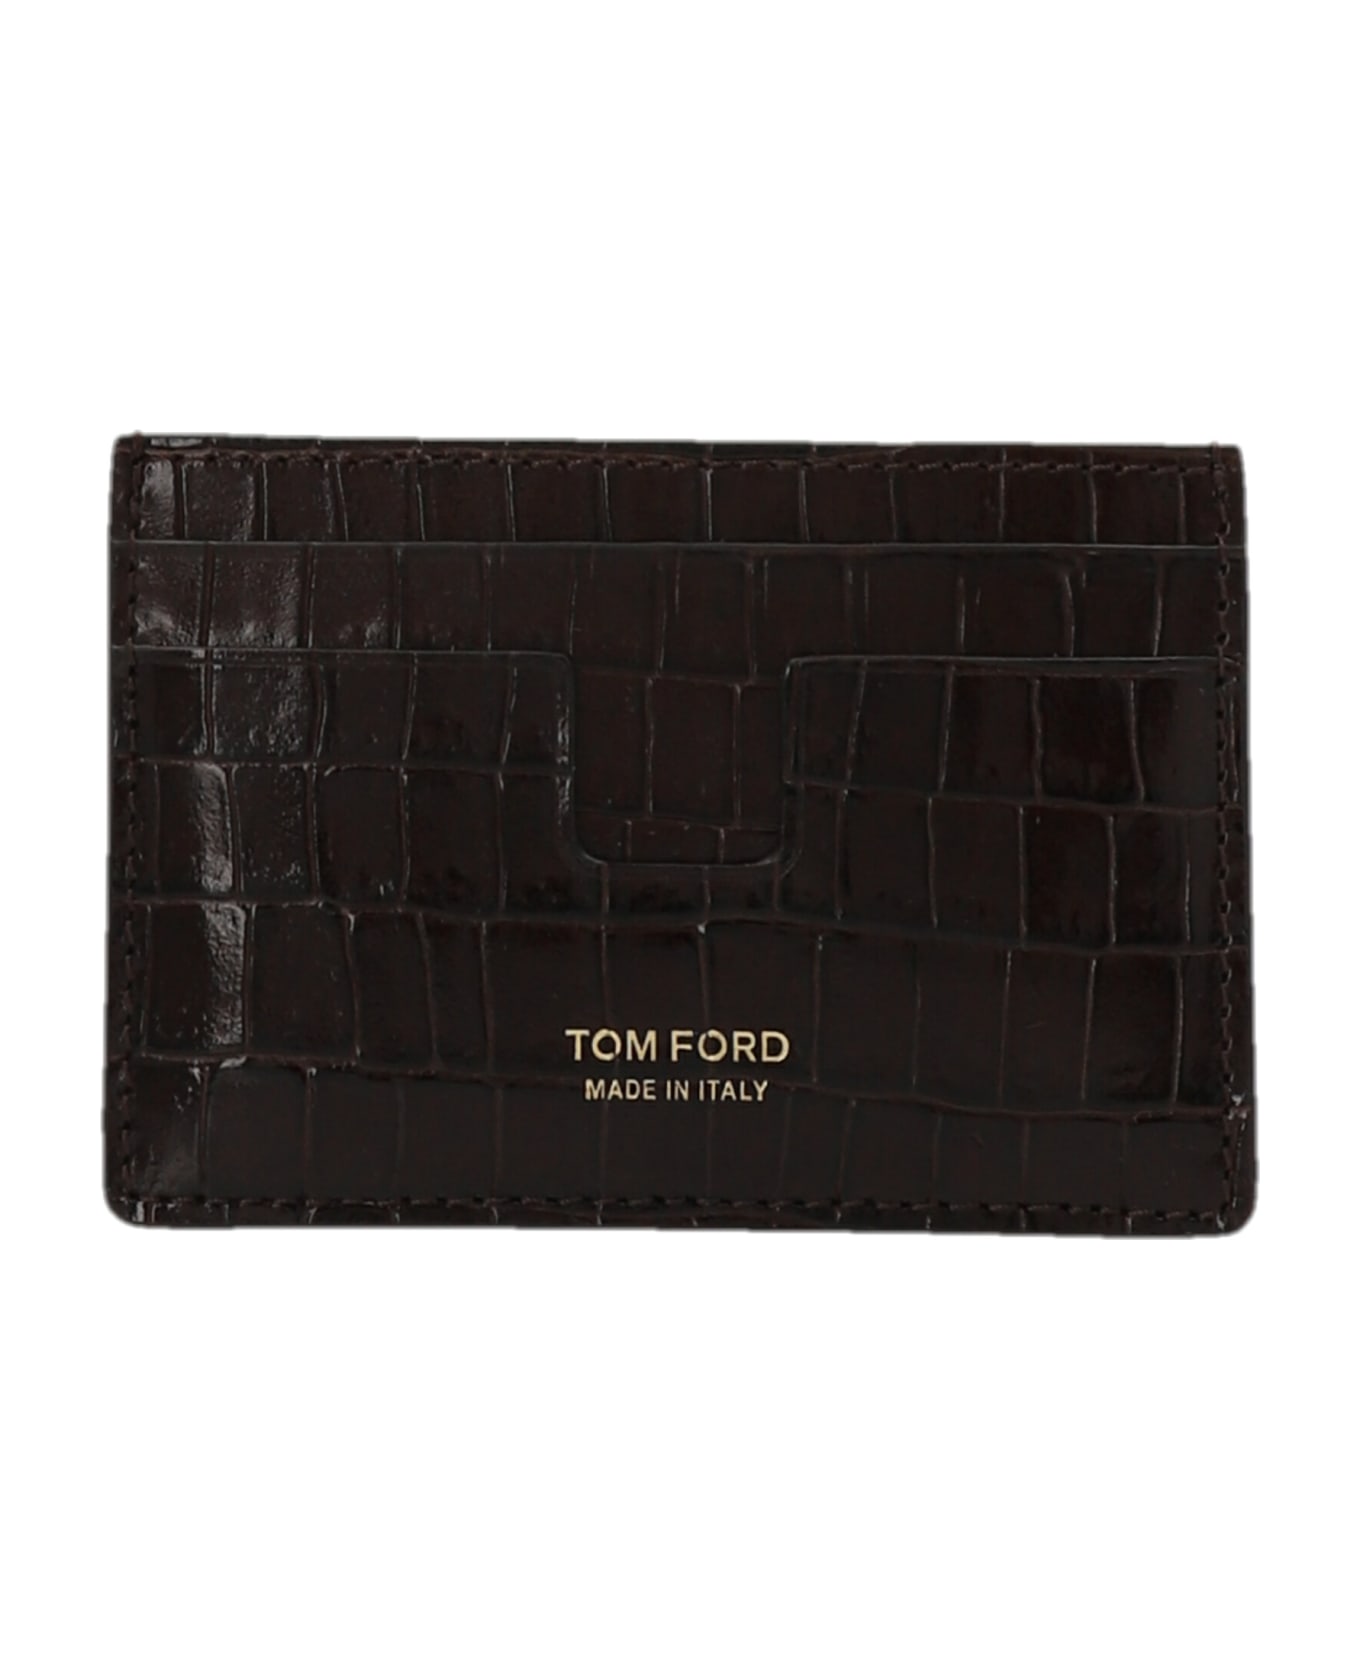 Tom Ford 't Line Classic' Card Holder - Brown